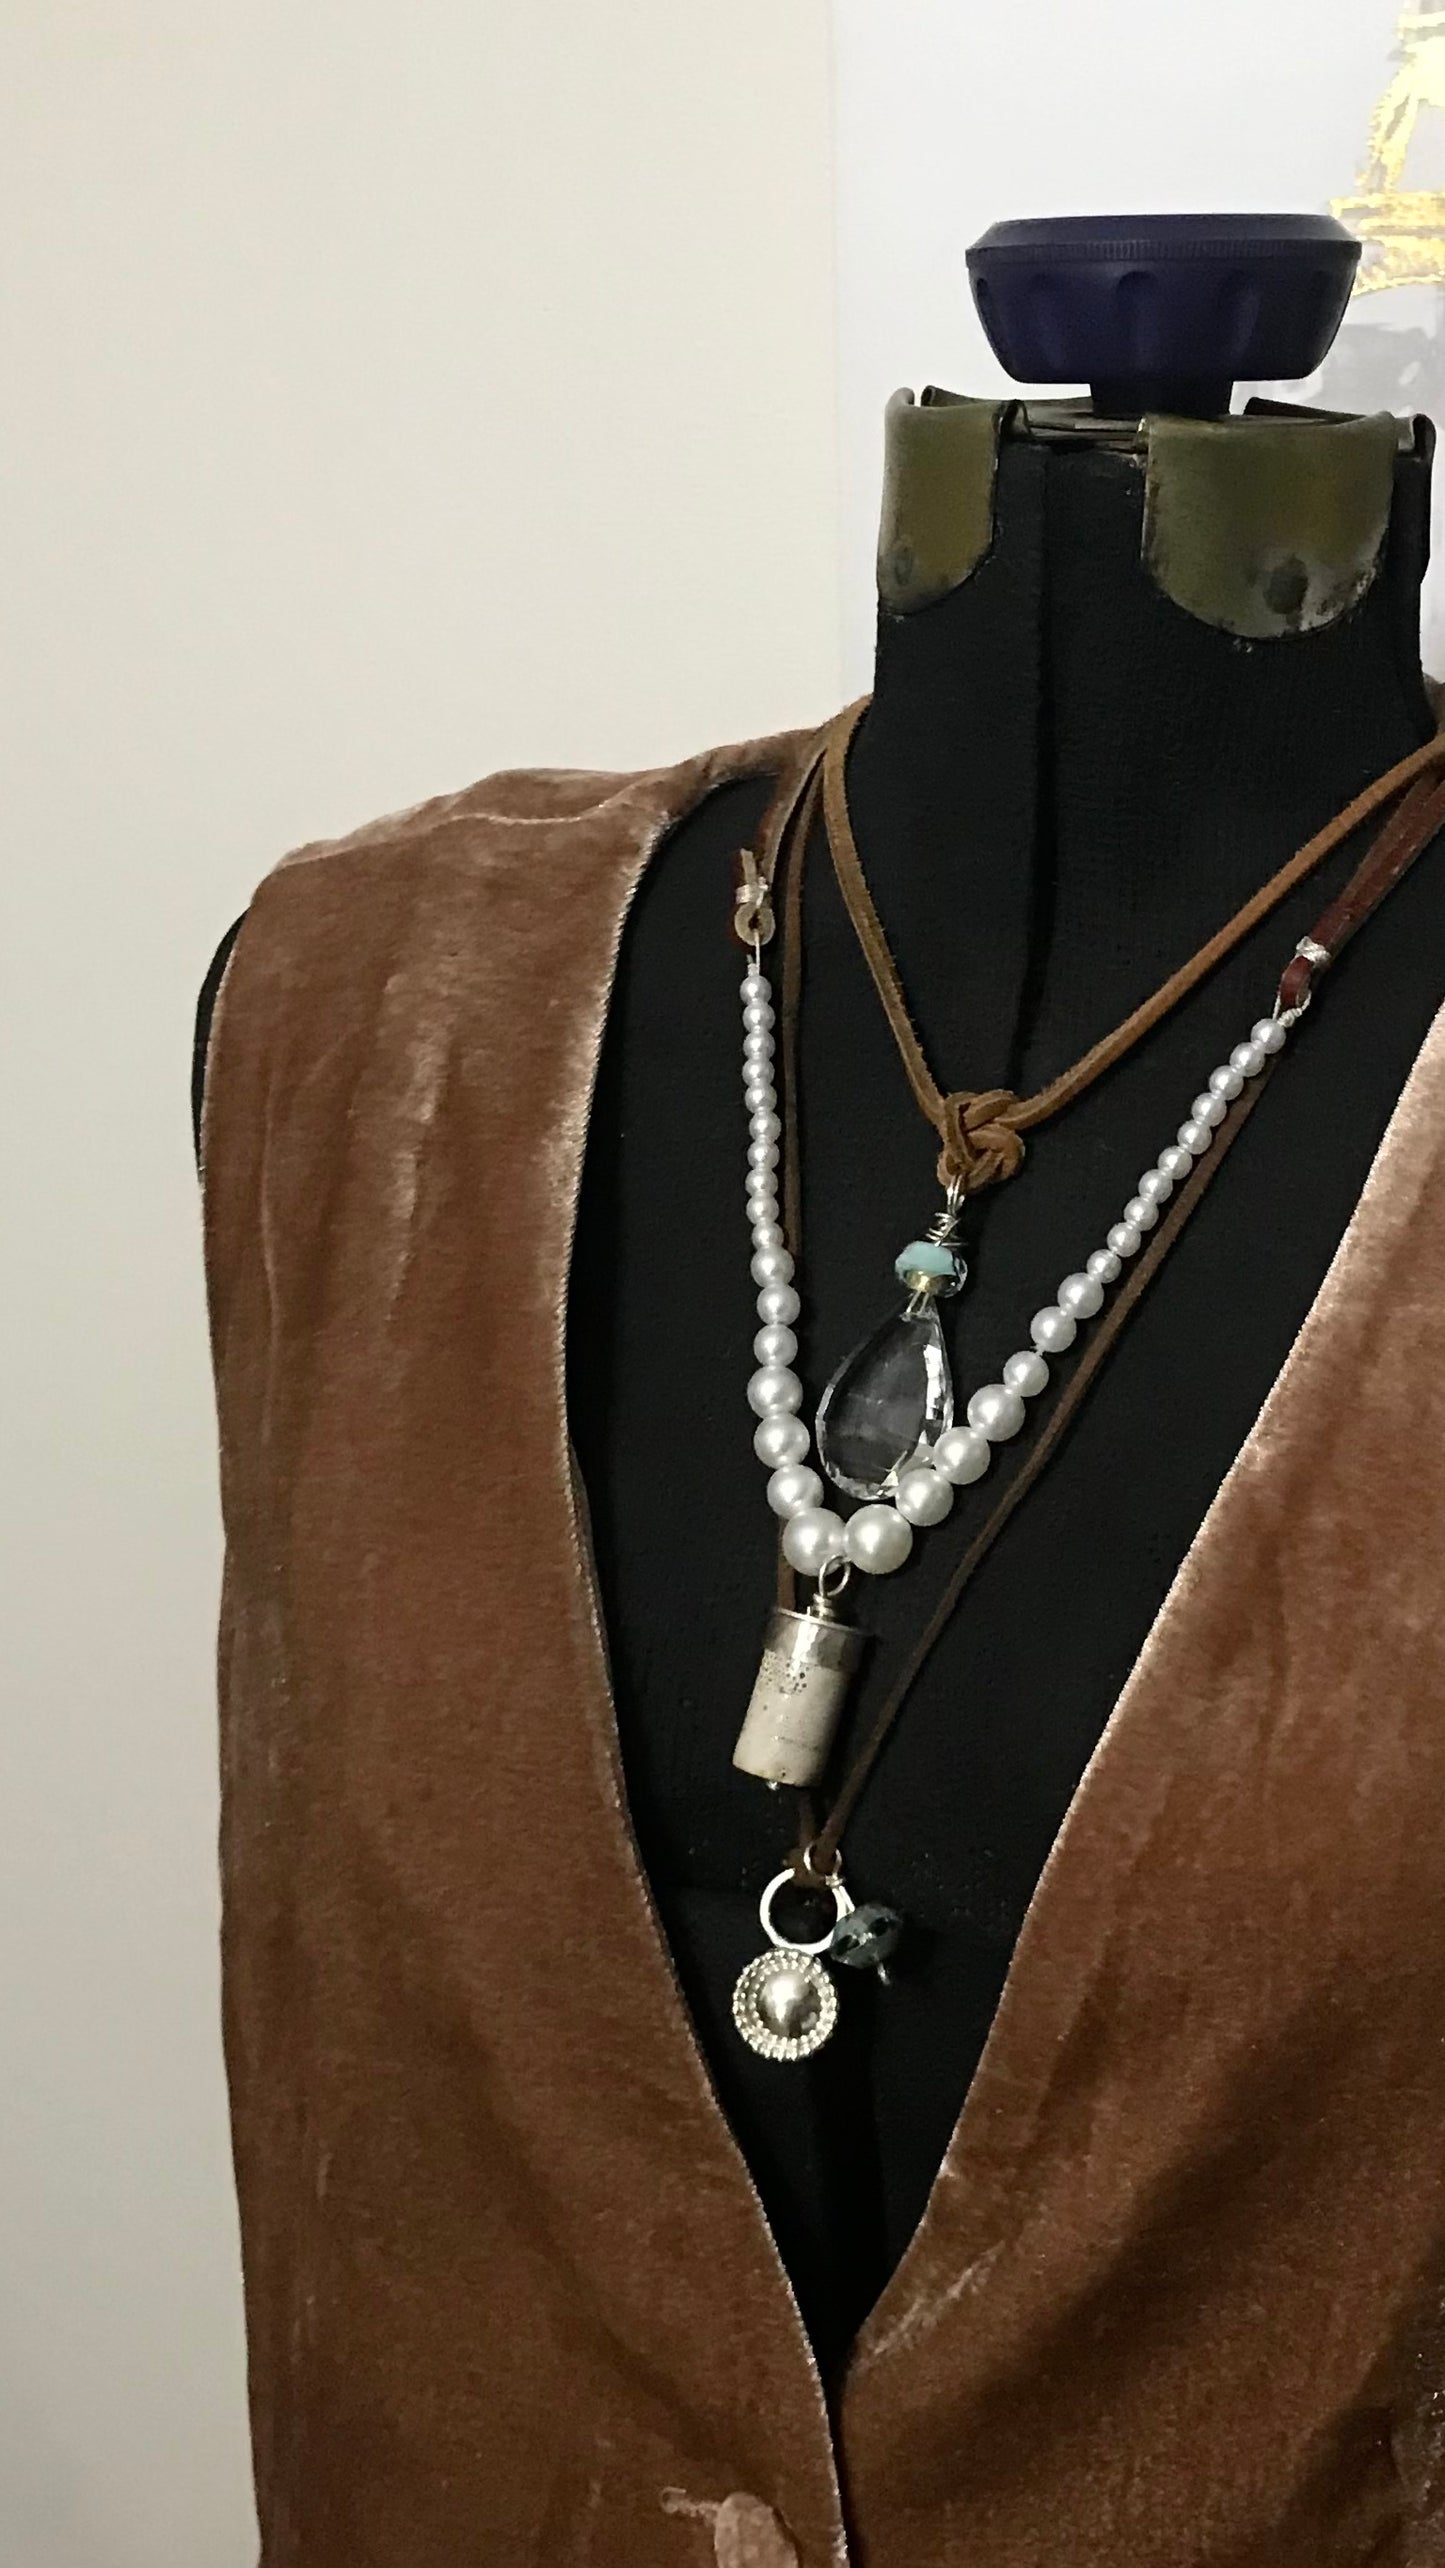 Leather and Pearls Necklace